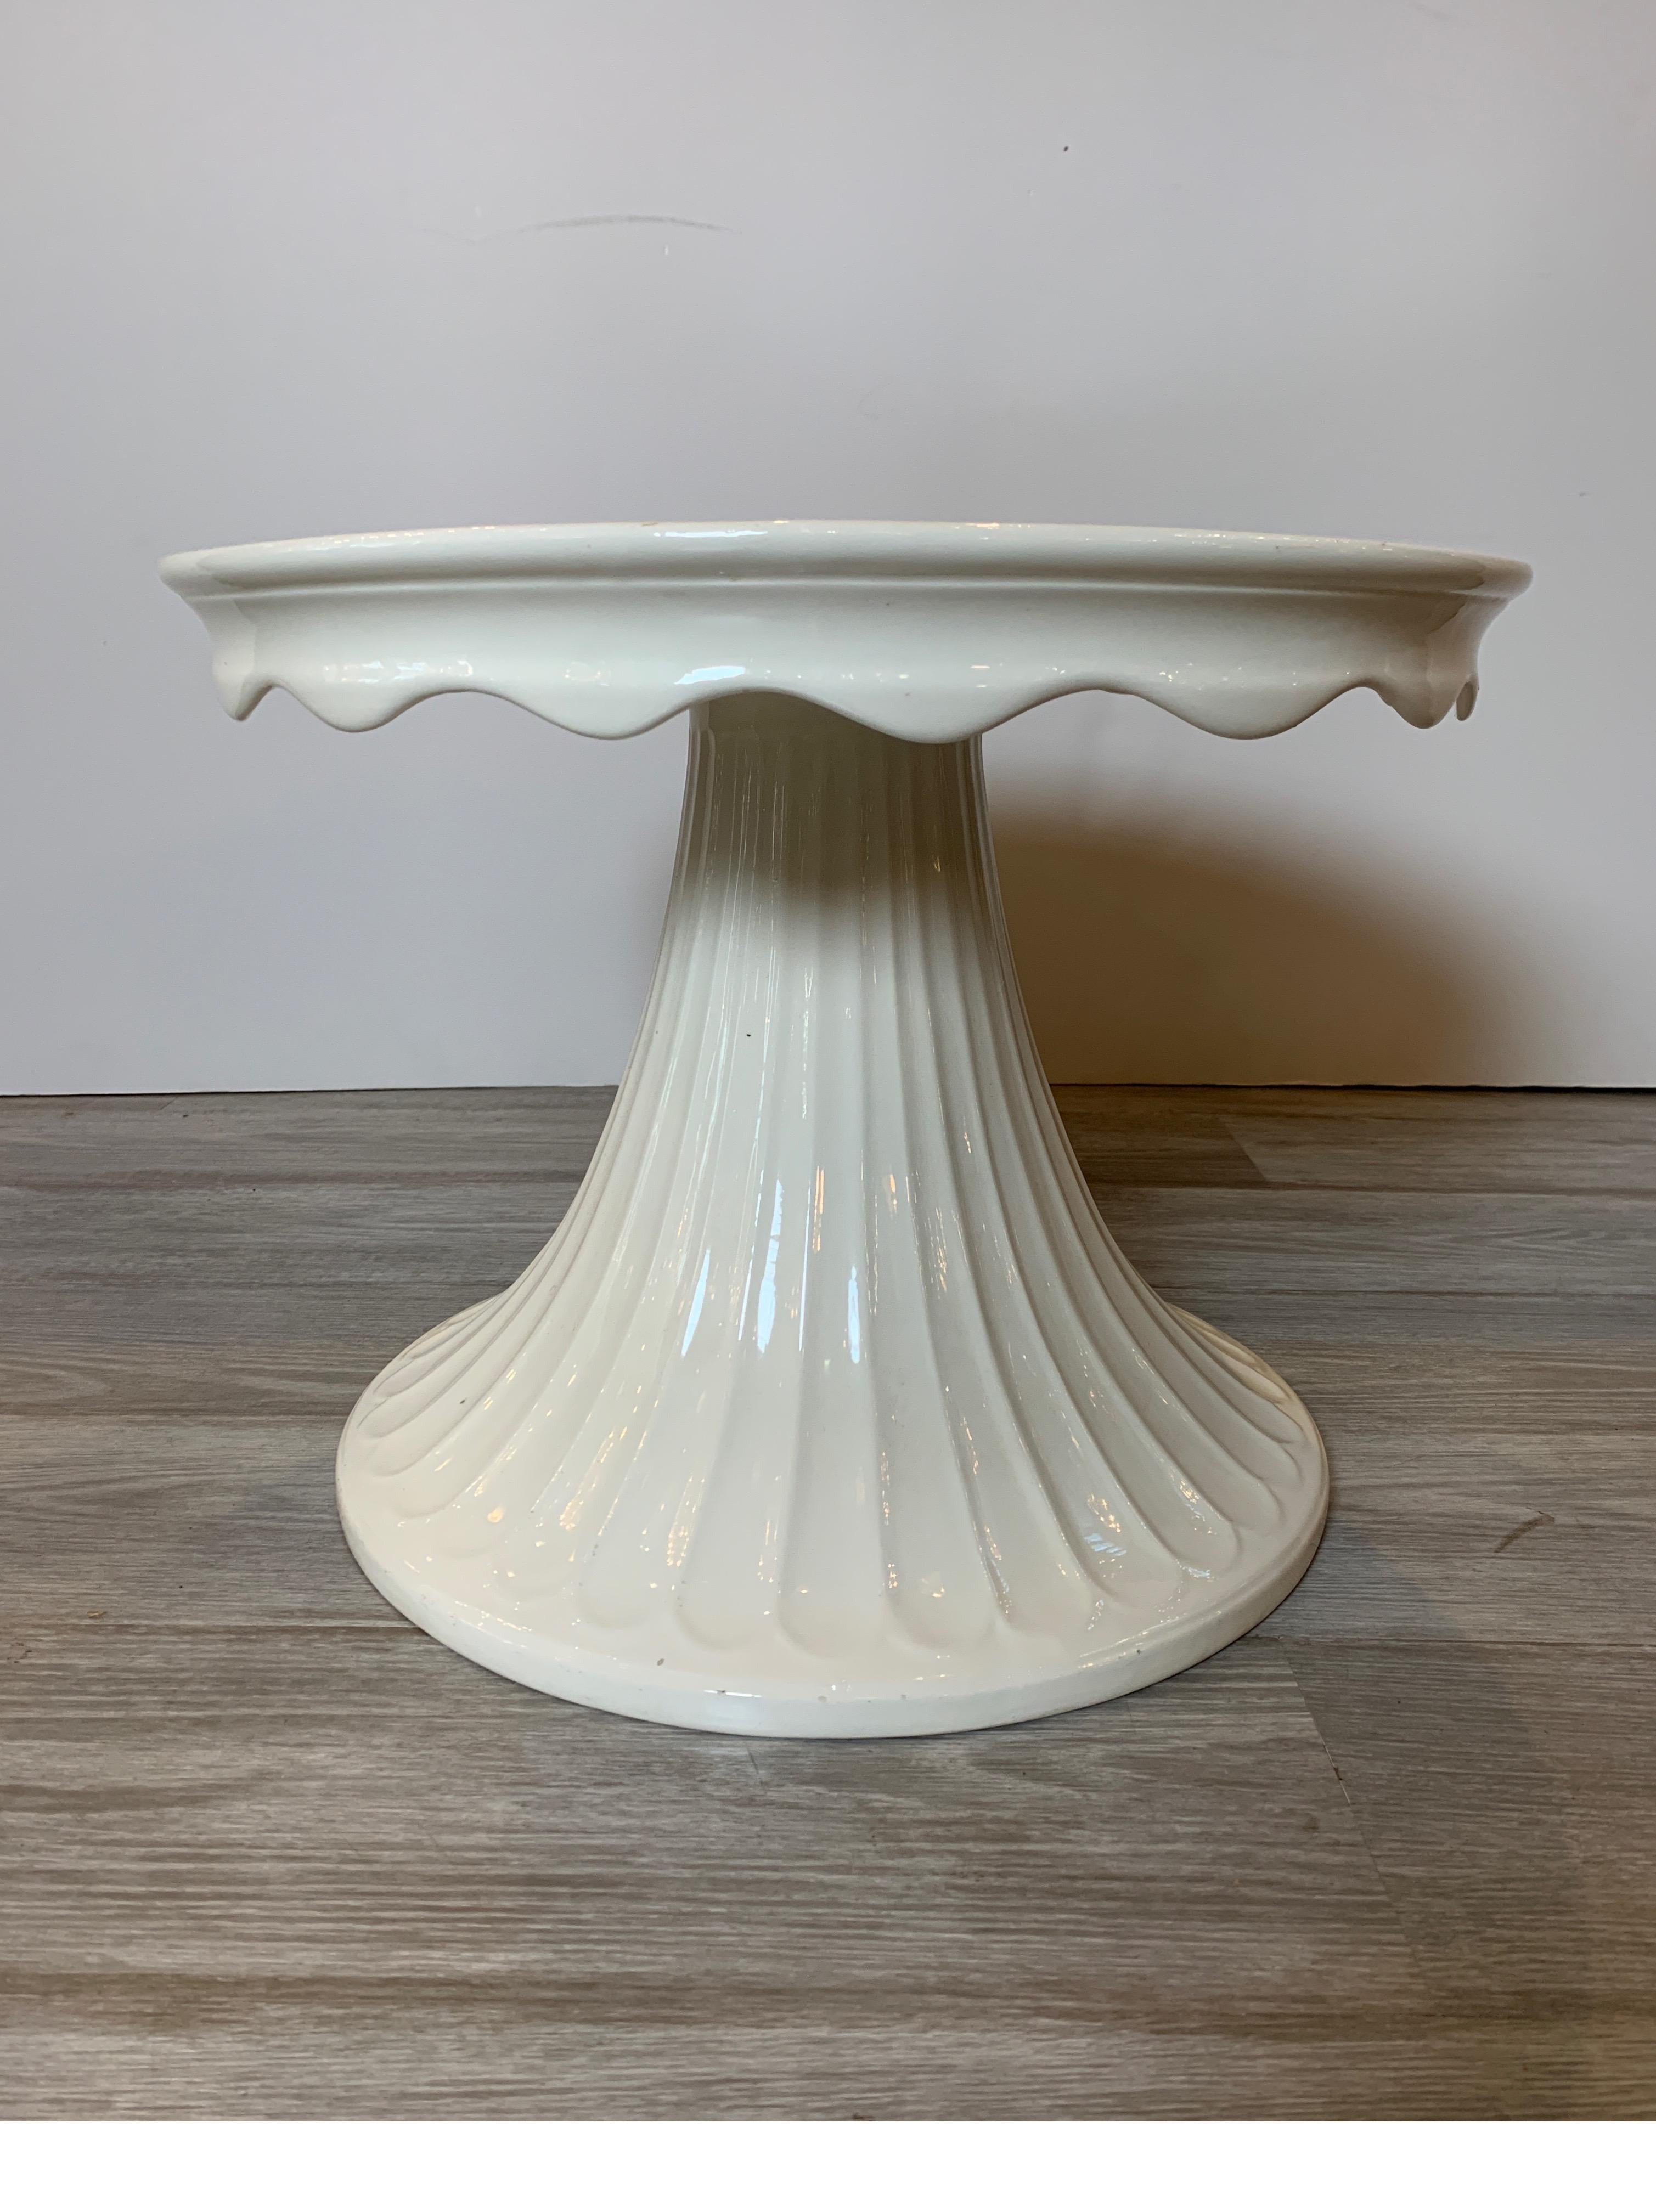 Italian ceramic drinks table Blanc de Chine by Bassanello, Martin Imports
Nice shape and design, overall good condition with slight line discoloration on top surface
Measures: 18.25